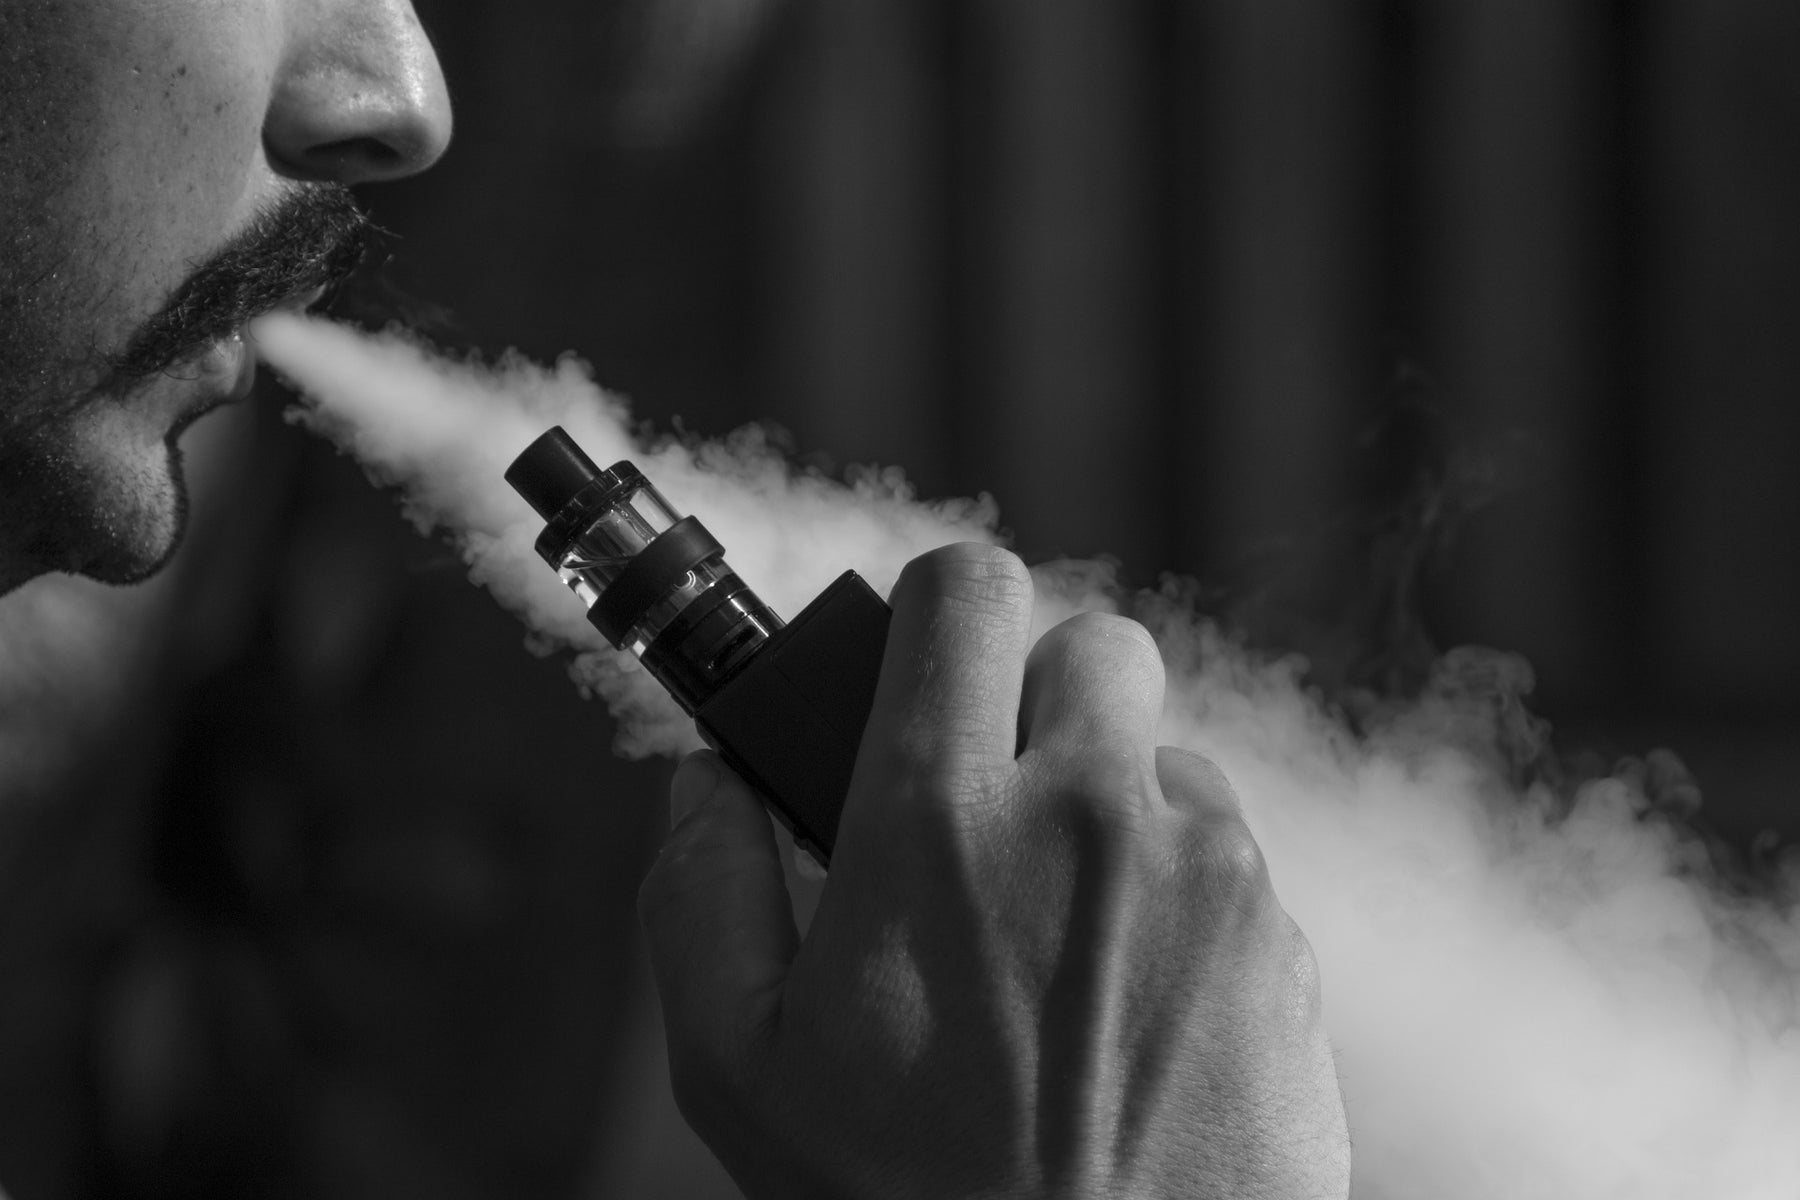 Mods & Pods: The Differences Between These Two Vape Devices